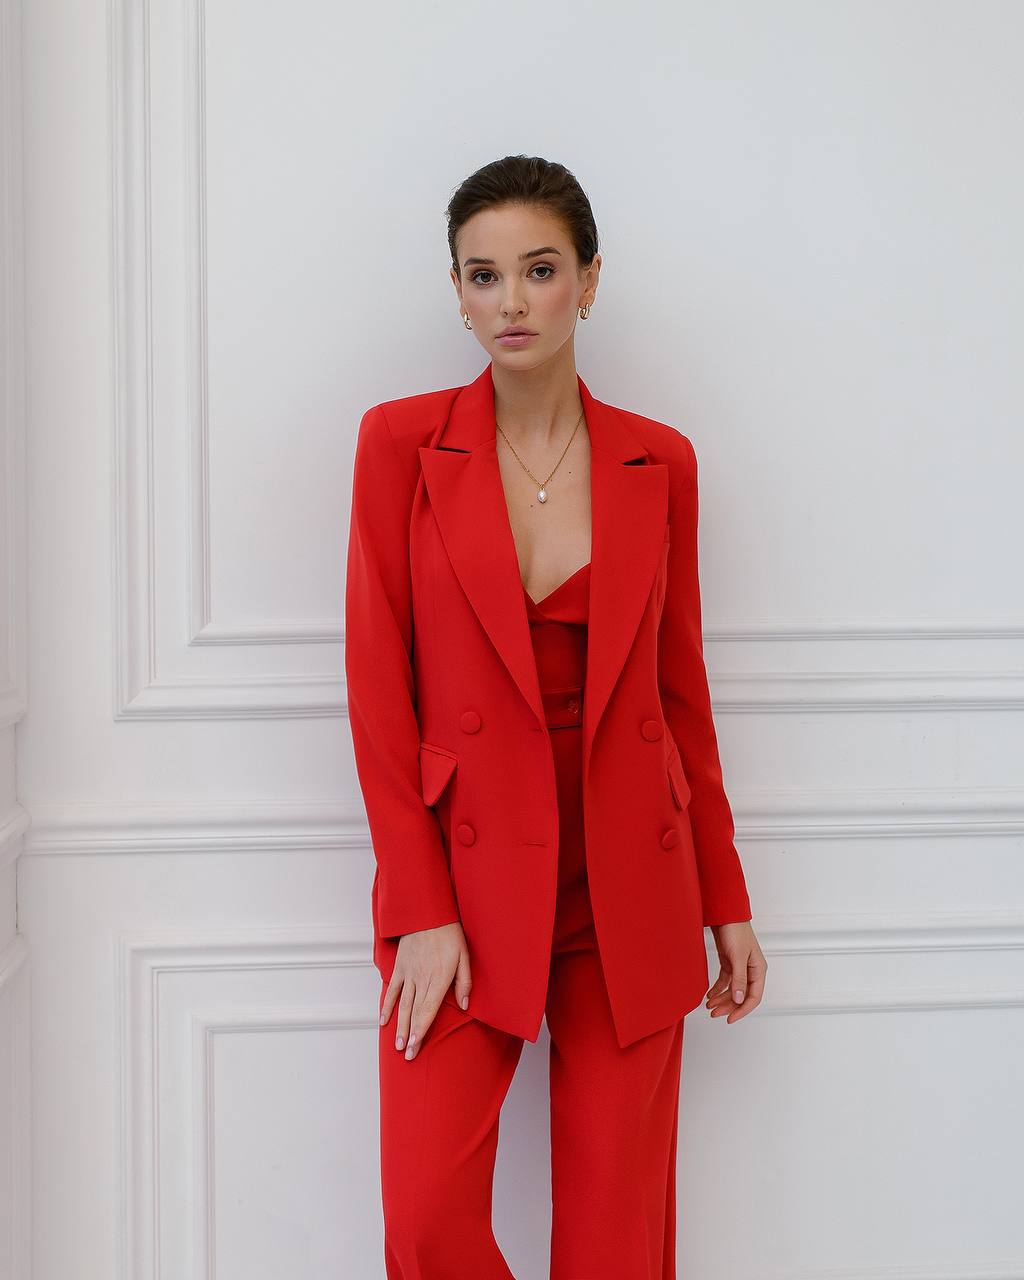 a woman in a red suit standing in front of a white wall